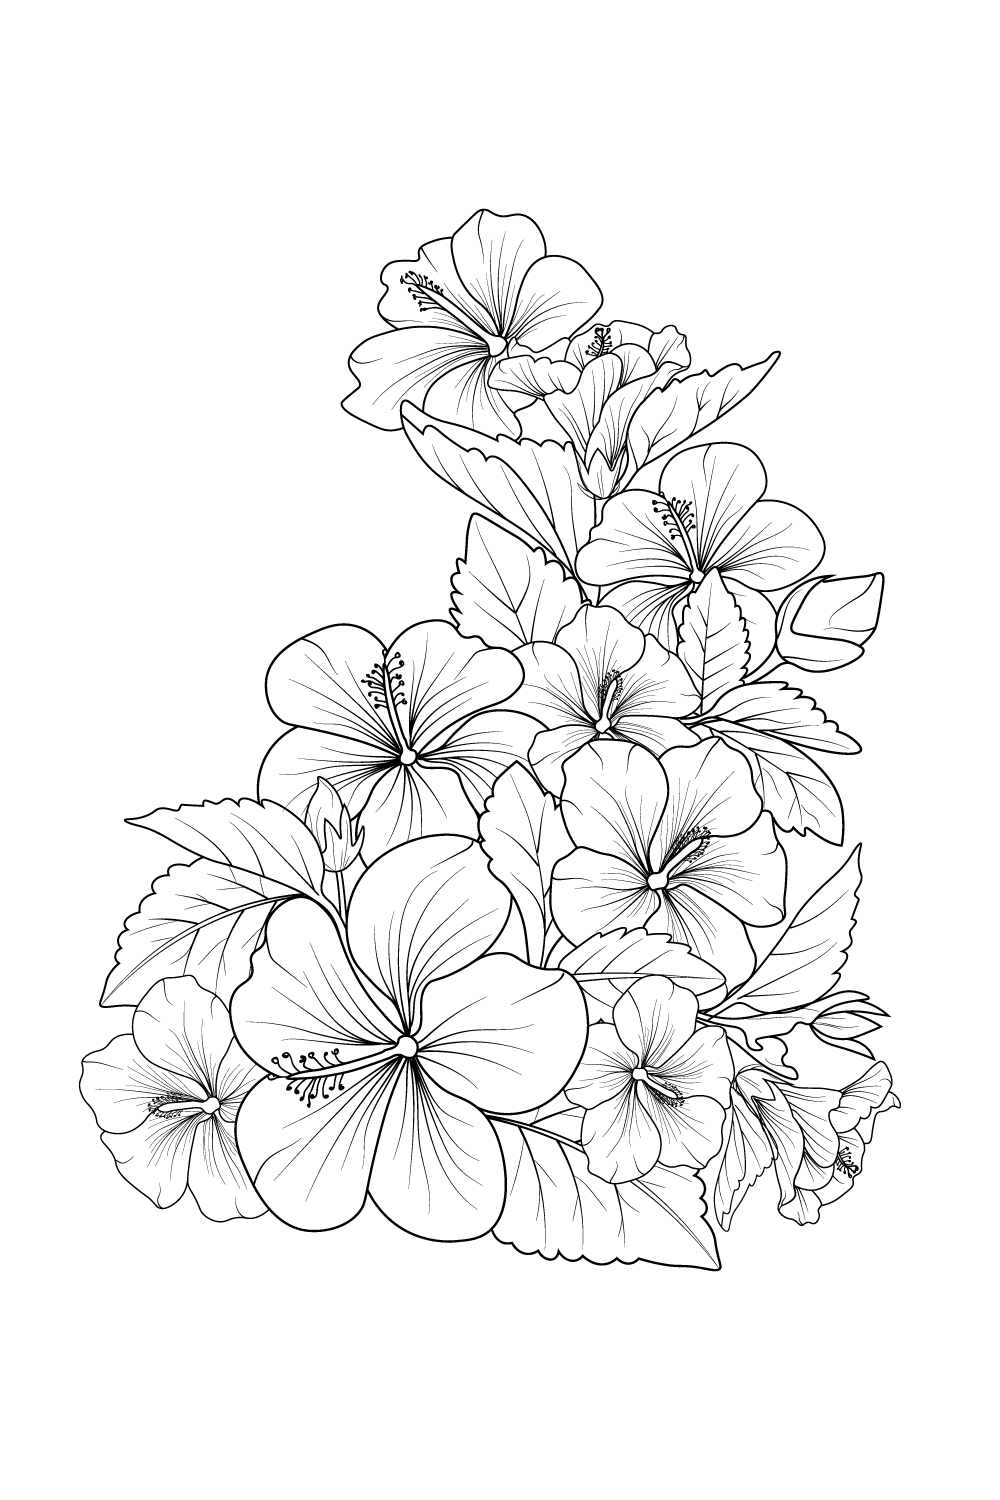 Hibiscus flowers illustration coloring page, simplicity, Embellishment, monochrome, rose vector art, pinterest preview image.